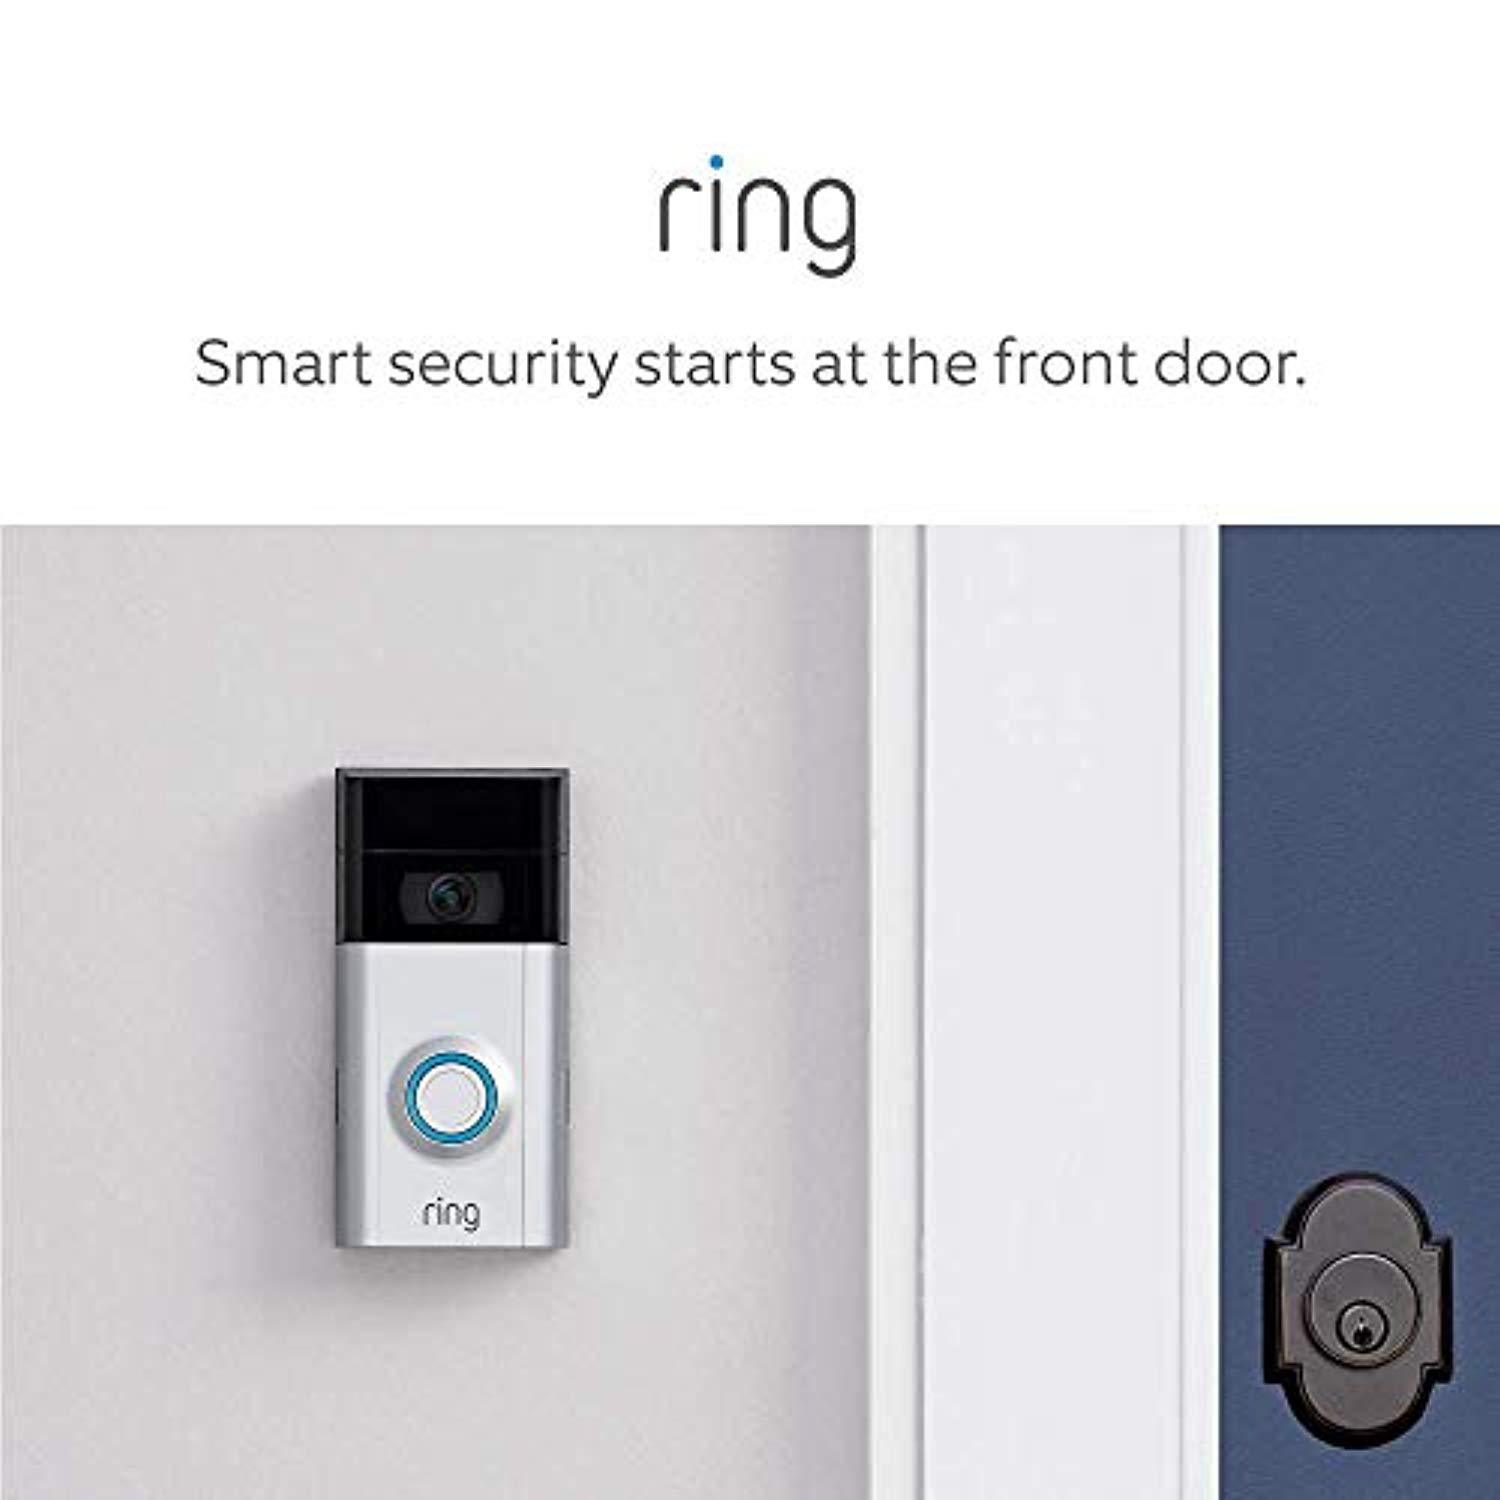 Ring Wi-Fi Video Doorbell - Wired, Black - Model B08CKHPP52 – Crawfords  Superstore